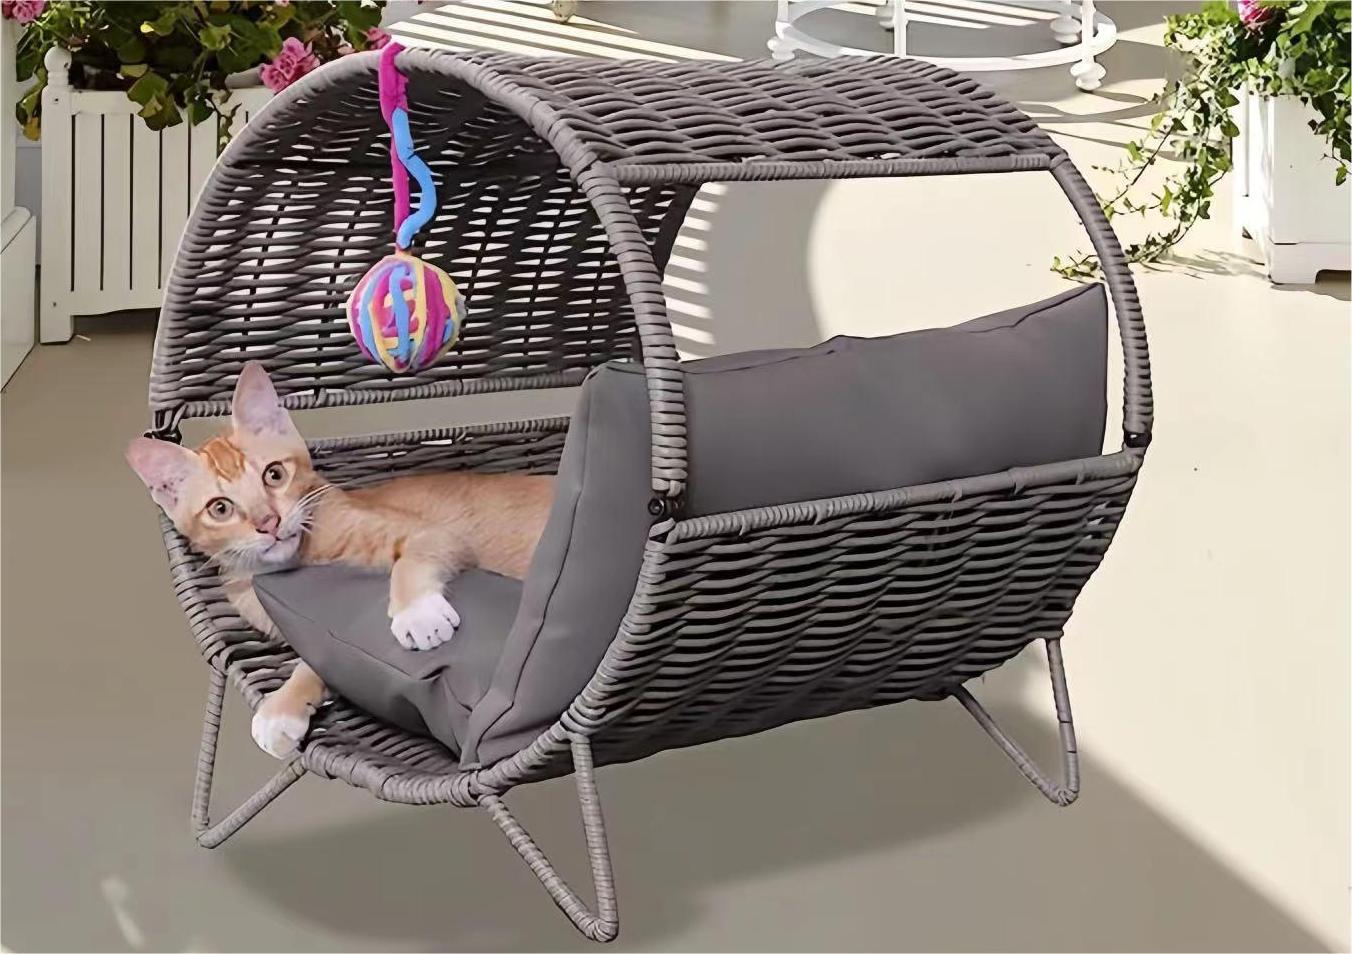 CONTEMPORARY DESIGN: Your cats will love this detachable wicker cat bed and stand with a modern design brings exciting new options for sleep and play while adding contemporary decor to any room.
SECURE DURABLE MATERIALS: Made with hand-woven, durable rattan this cat bed lounger can endure sharp claws and creates a healthy and secure space for your furry friend.